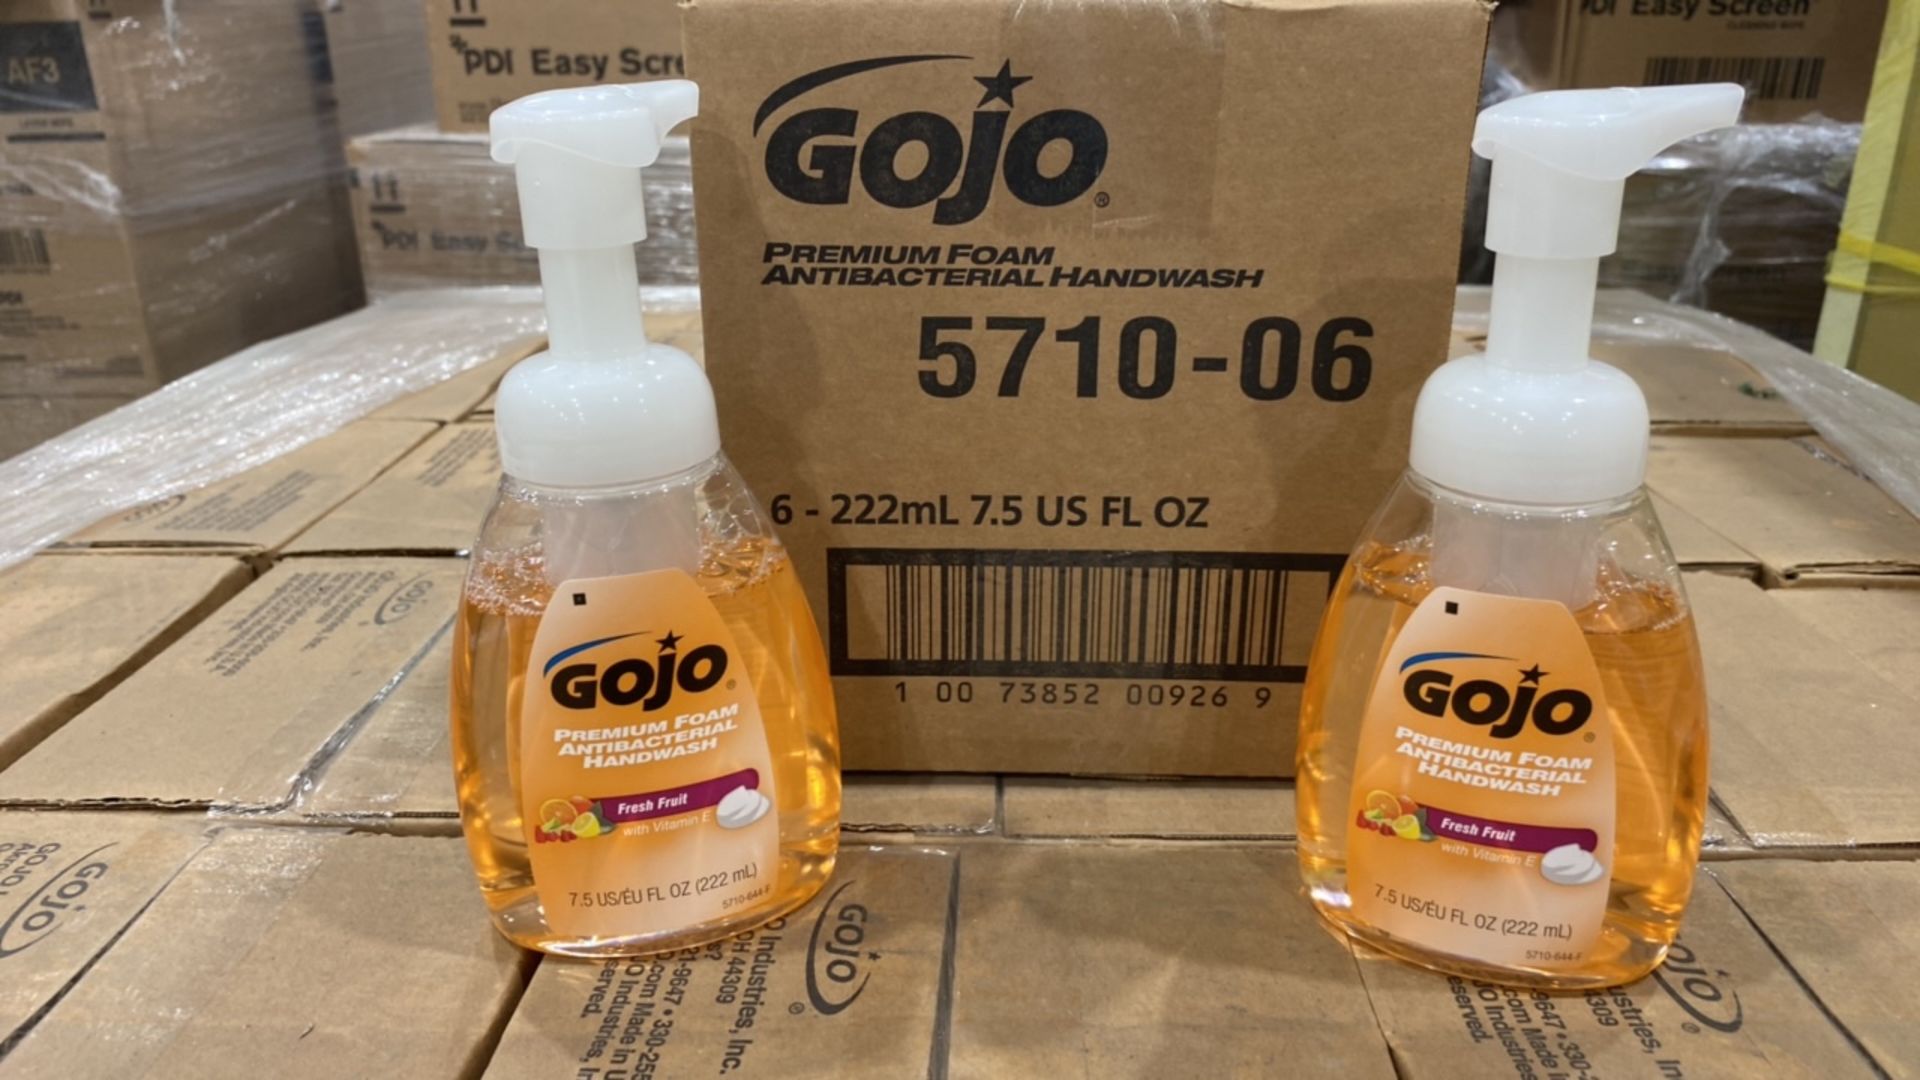 GOJO 5710-06 7 OZ. ANTIBACTERIAL FOAM HAND WASHES QTY:150 CASES/ 6 PER CASE